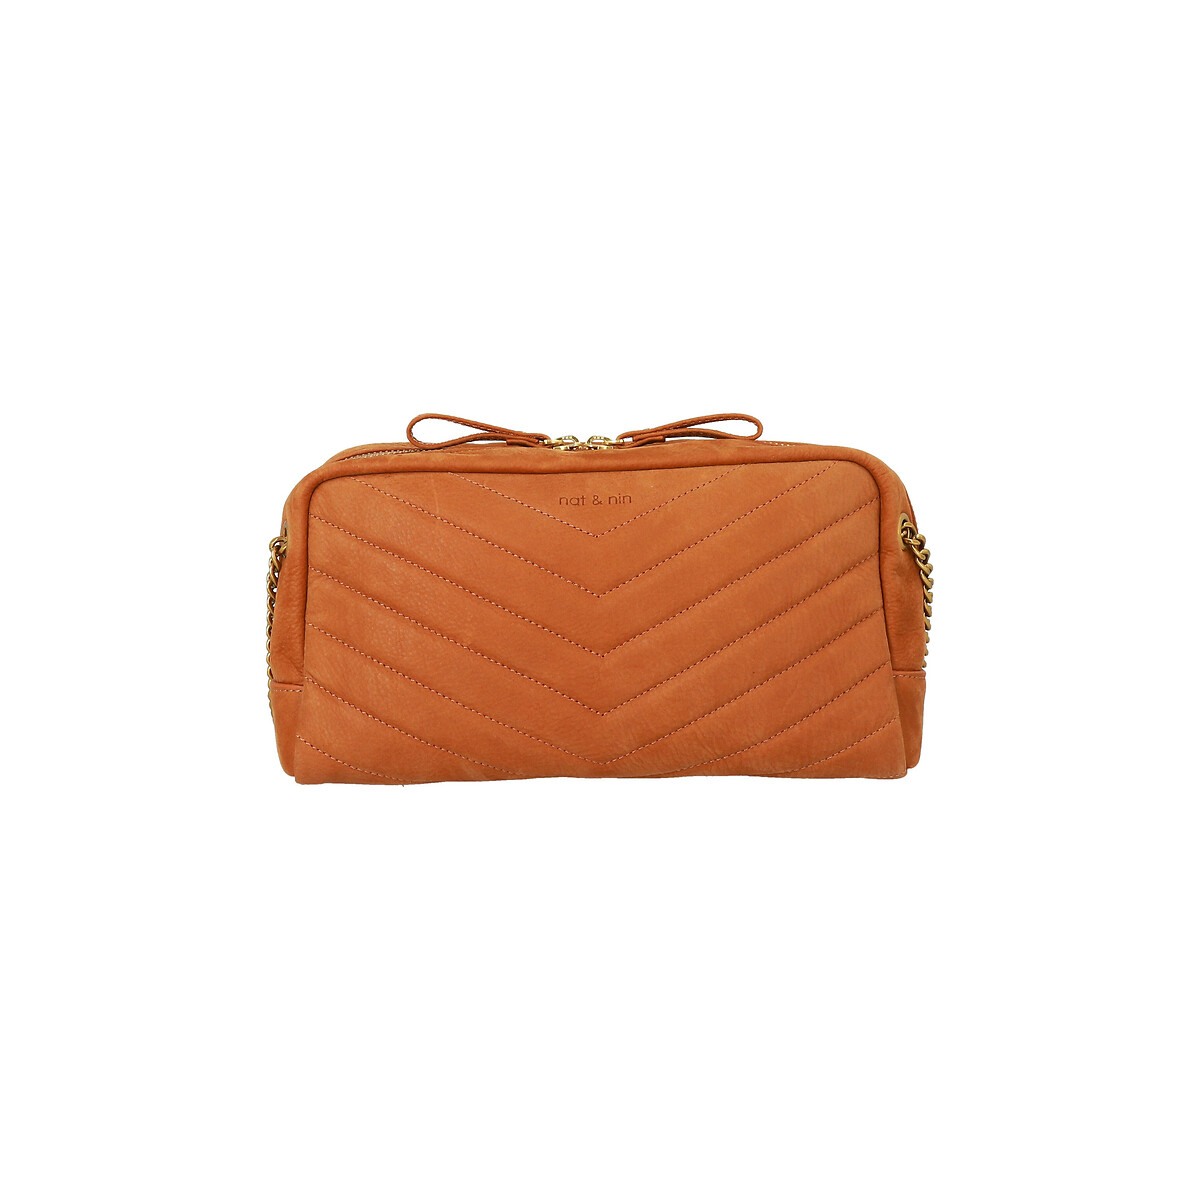 Rio Grande Handbag in Quilted Leather